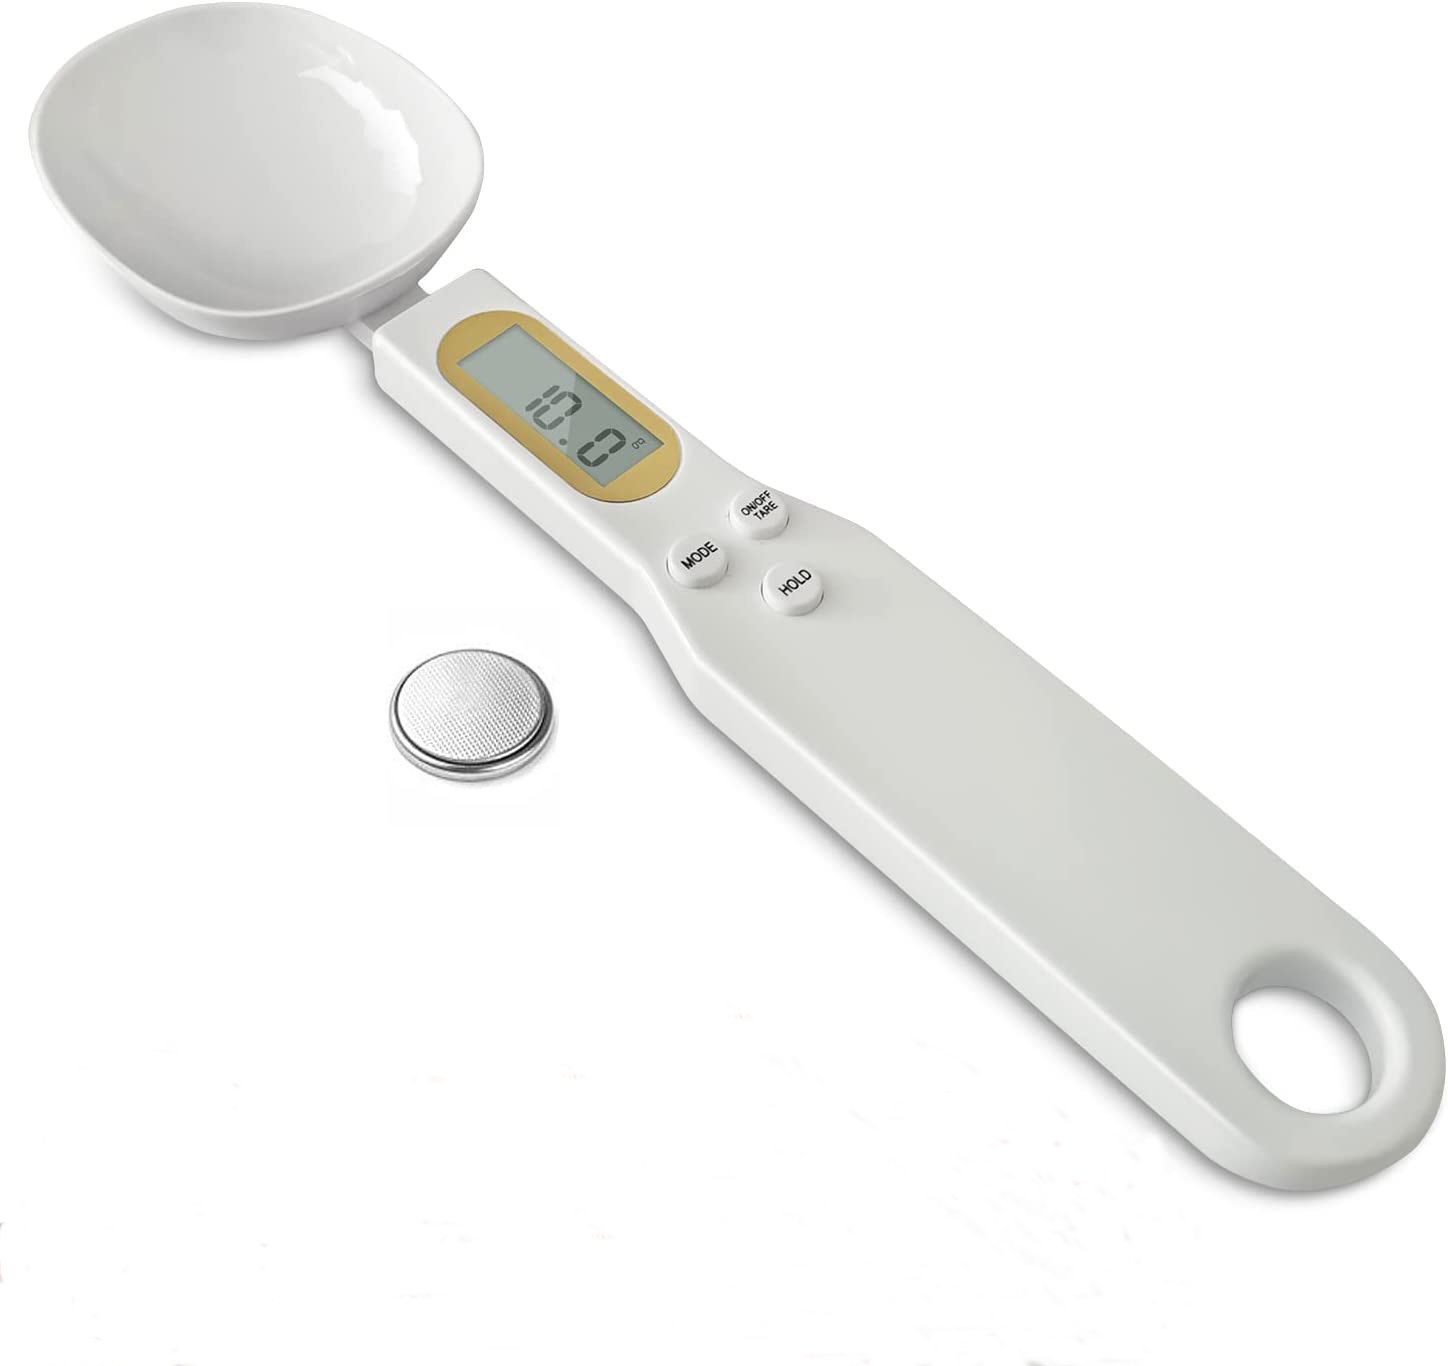 Kitchen Spoon Scale Digital Food Scale in Grams and Ounces White 500g/0.1g Weighing Tools Household LCD Display